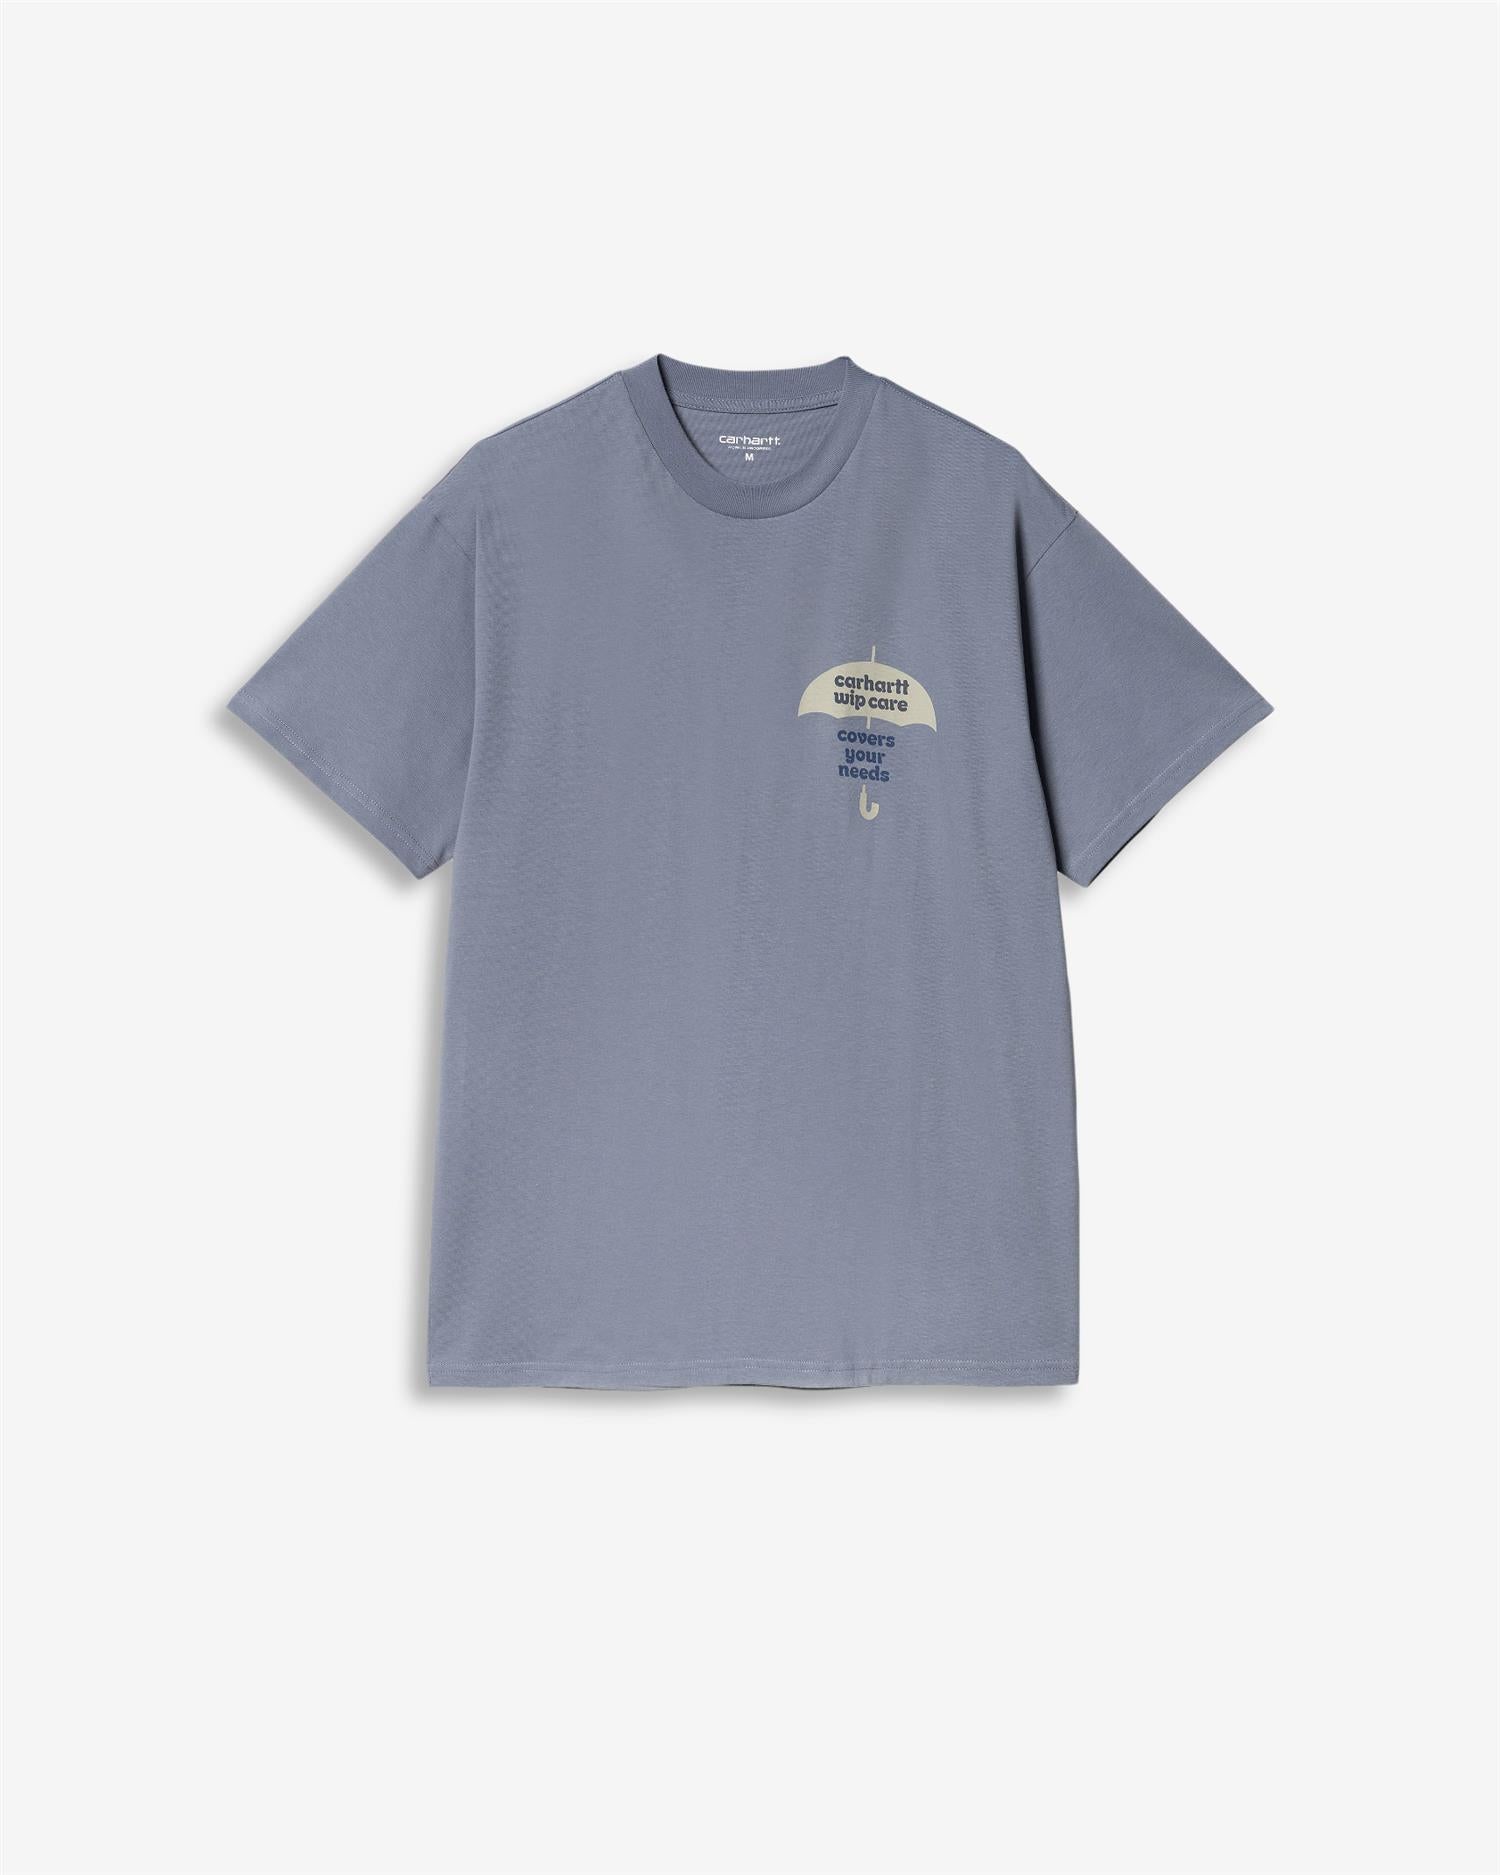 S/S COVERS T-SHIRT - BAY BLUE